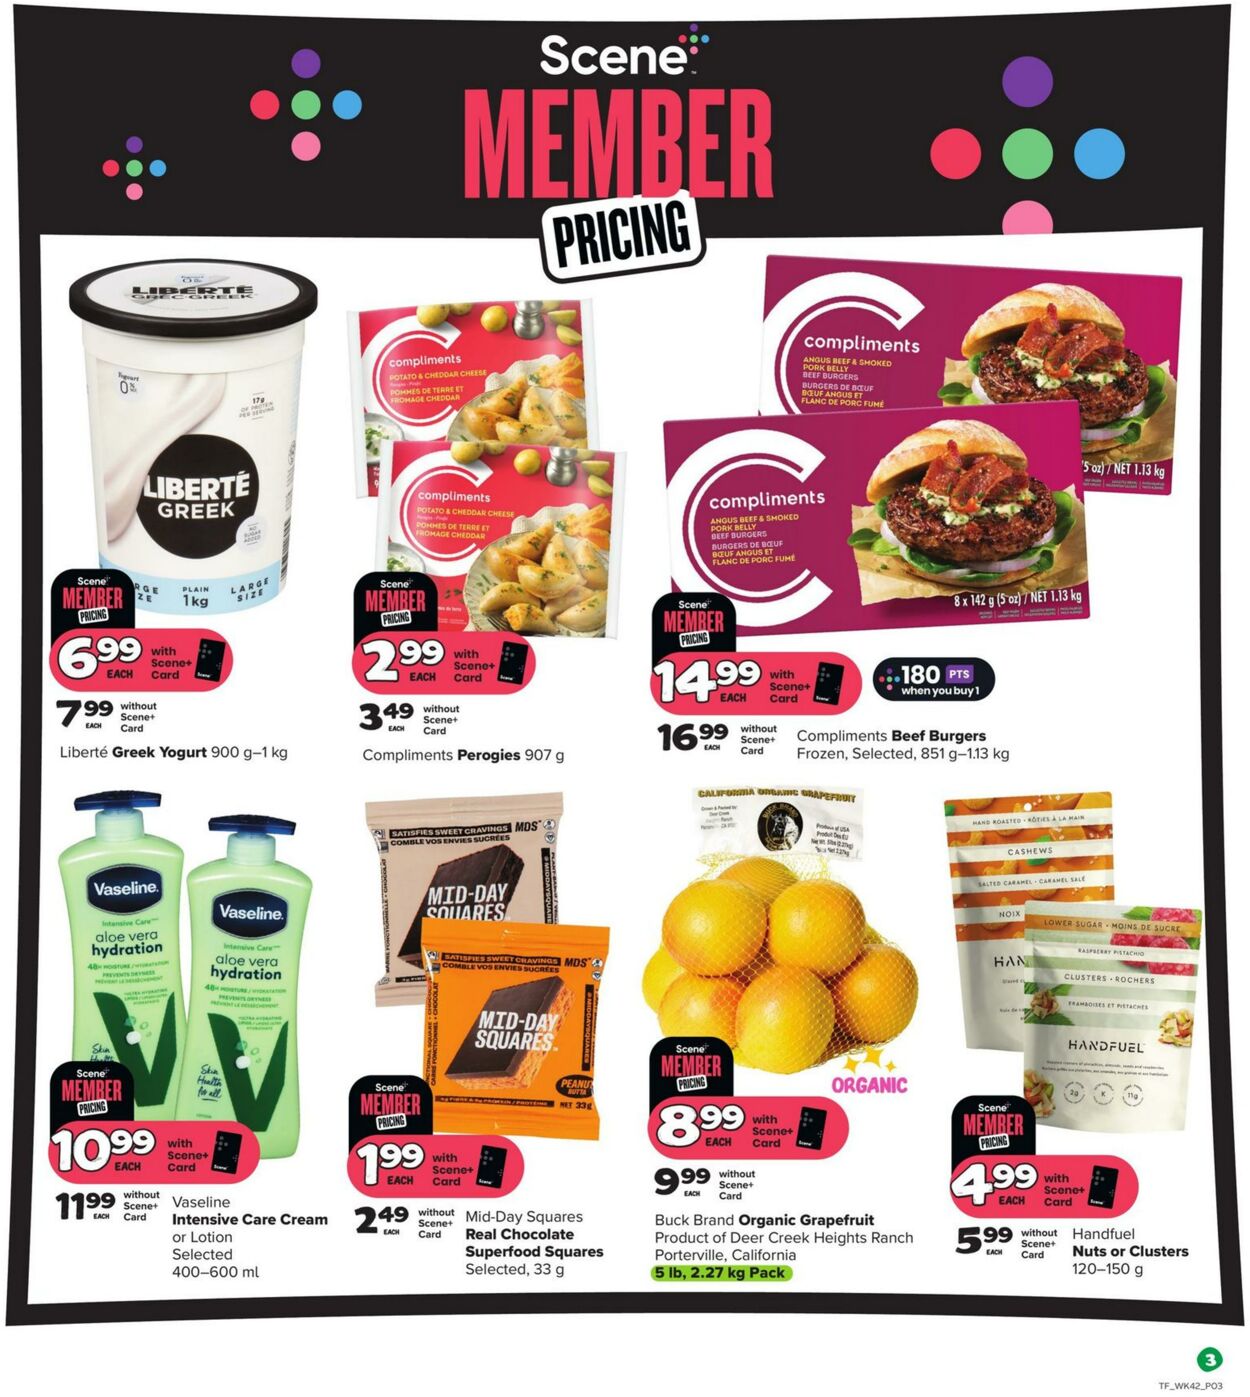 Thrifty Foods Flyer from 02/15/2024